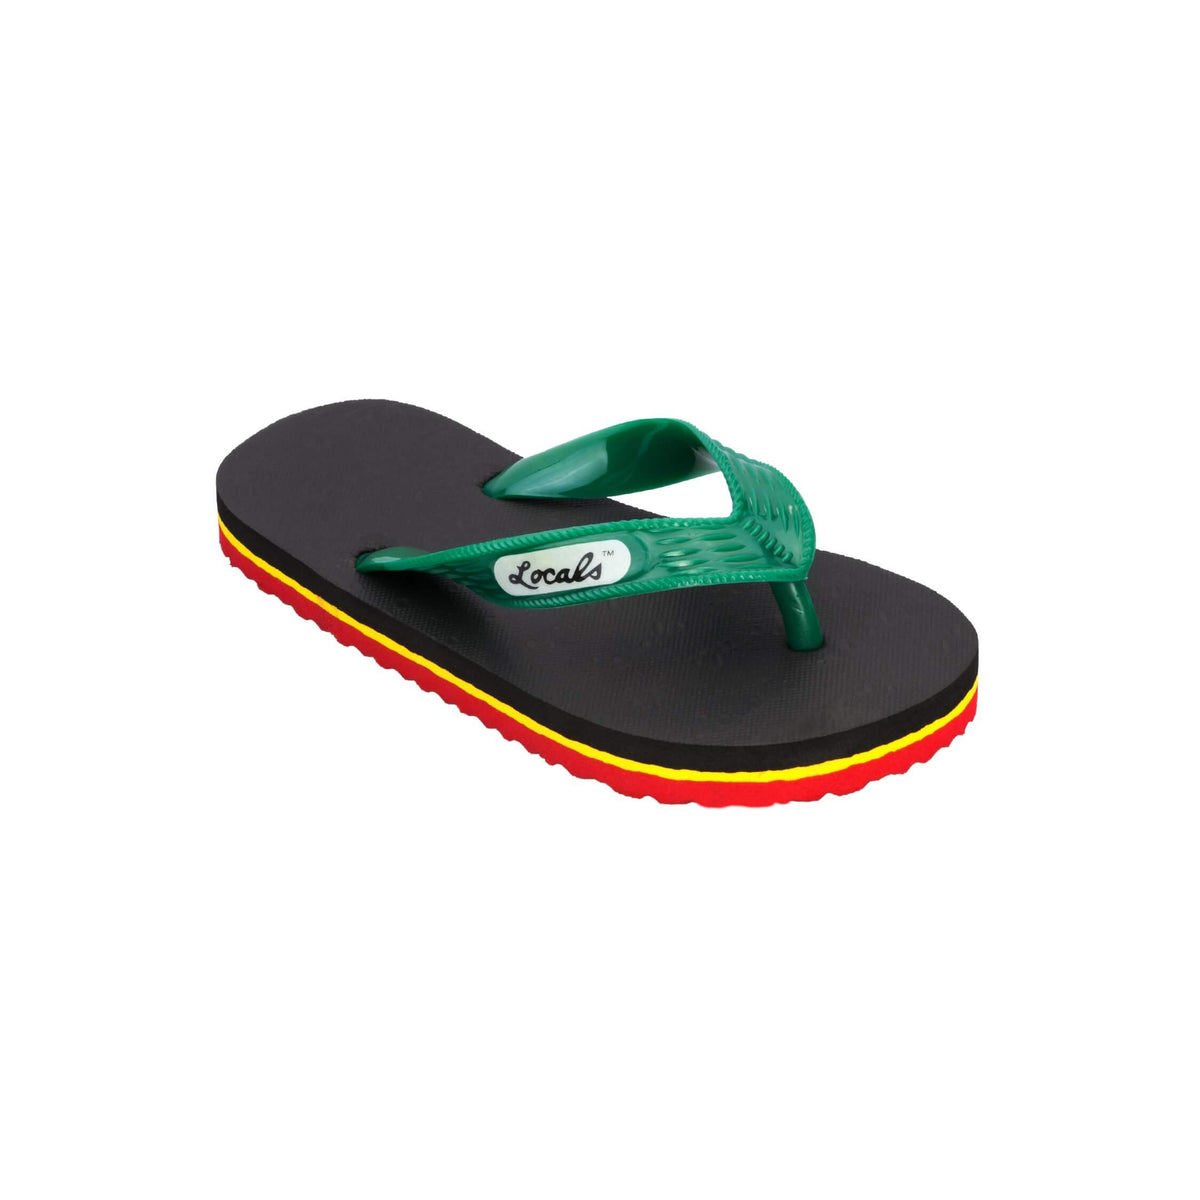 Kids Locals Slippers Striped Rubber Flip Flops from Hawaii - Aloha